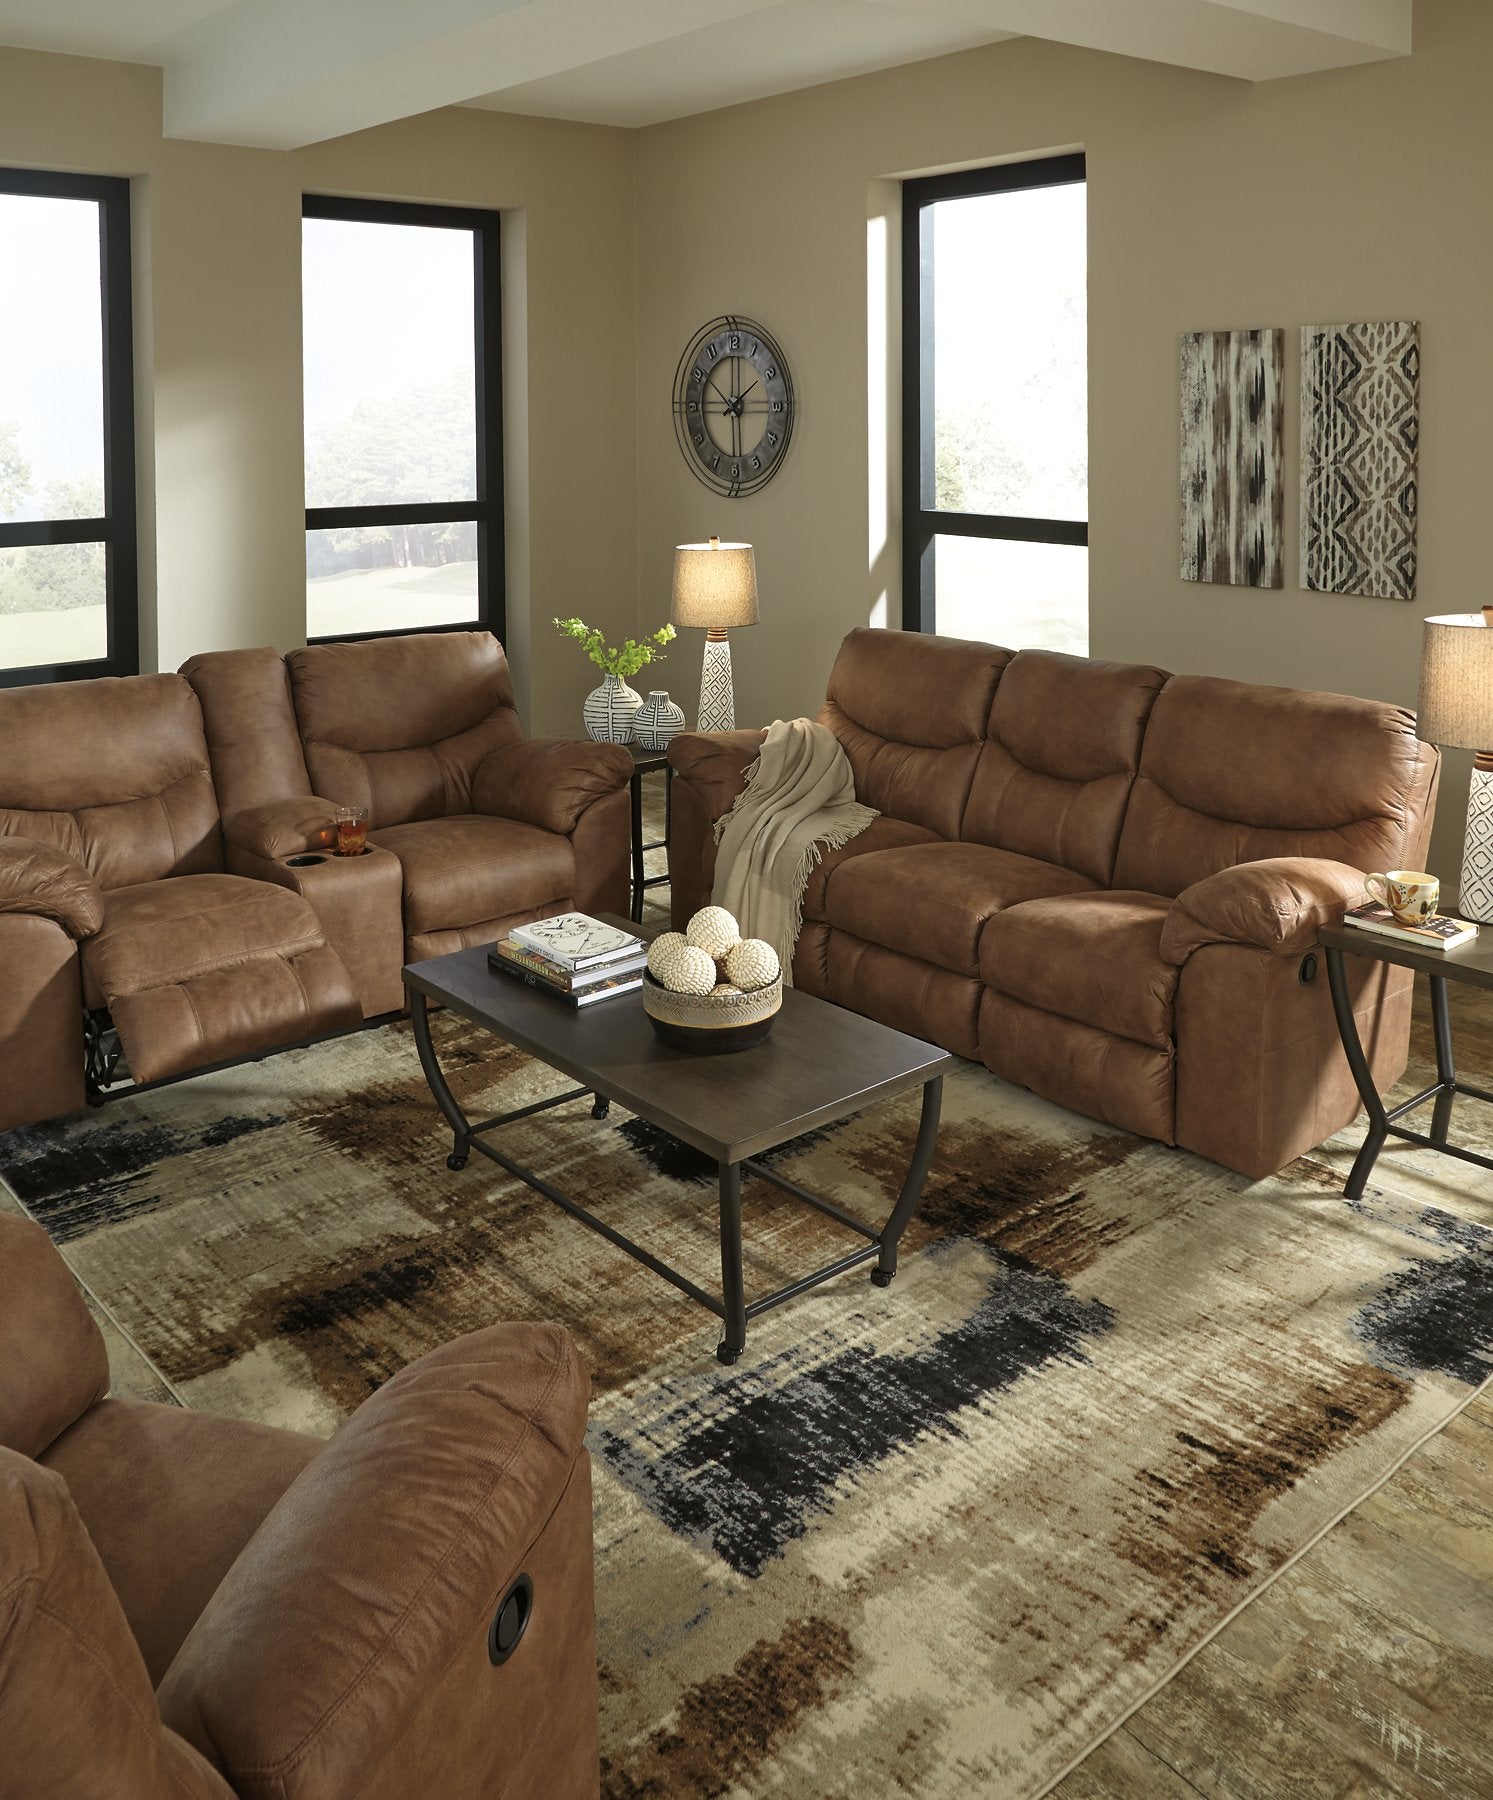 Boxberg Reclining Loveseat with Console - Half Price Furniture